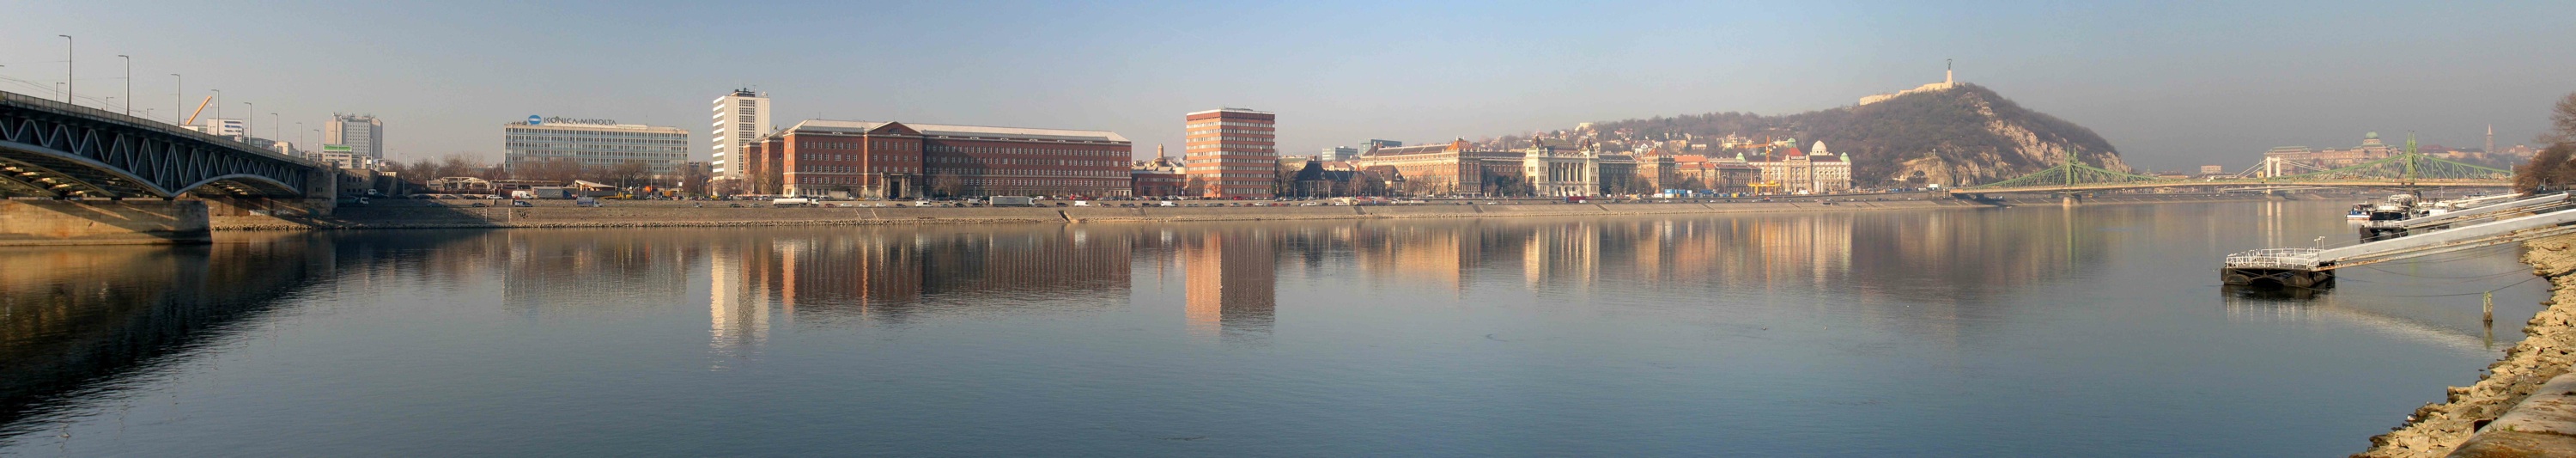 View of the university from the Danube. Photo by Balazs Sudar.